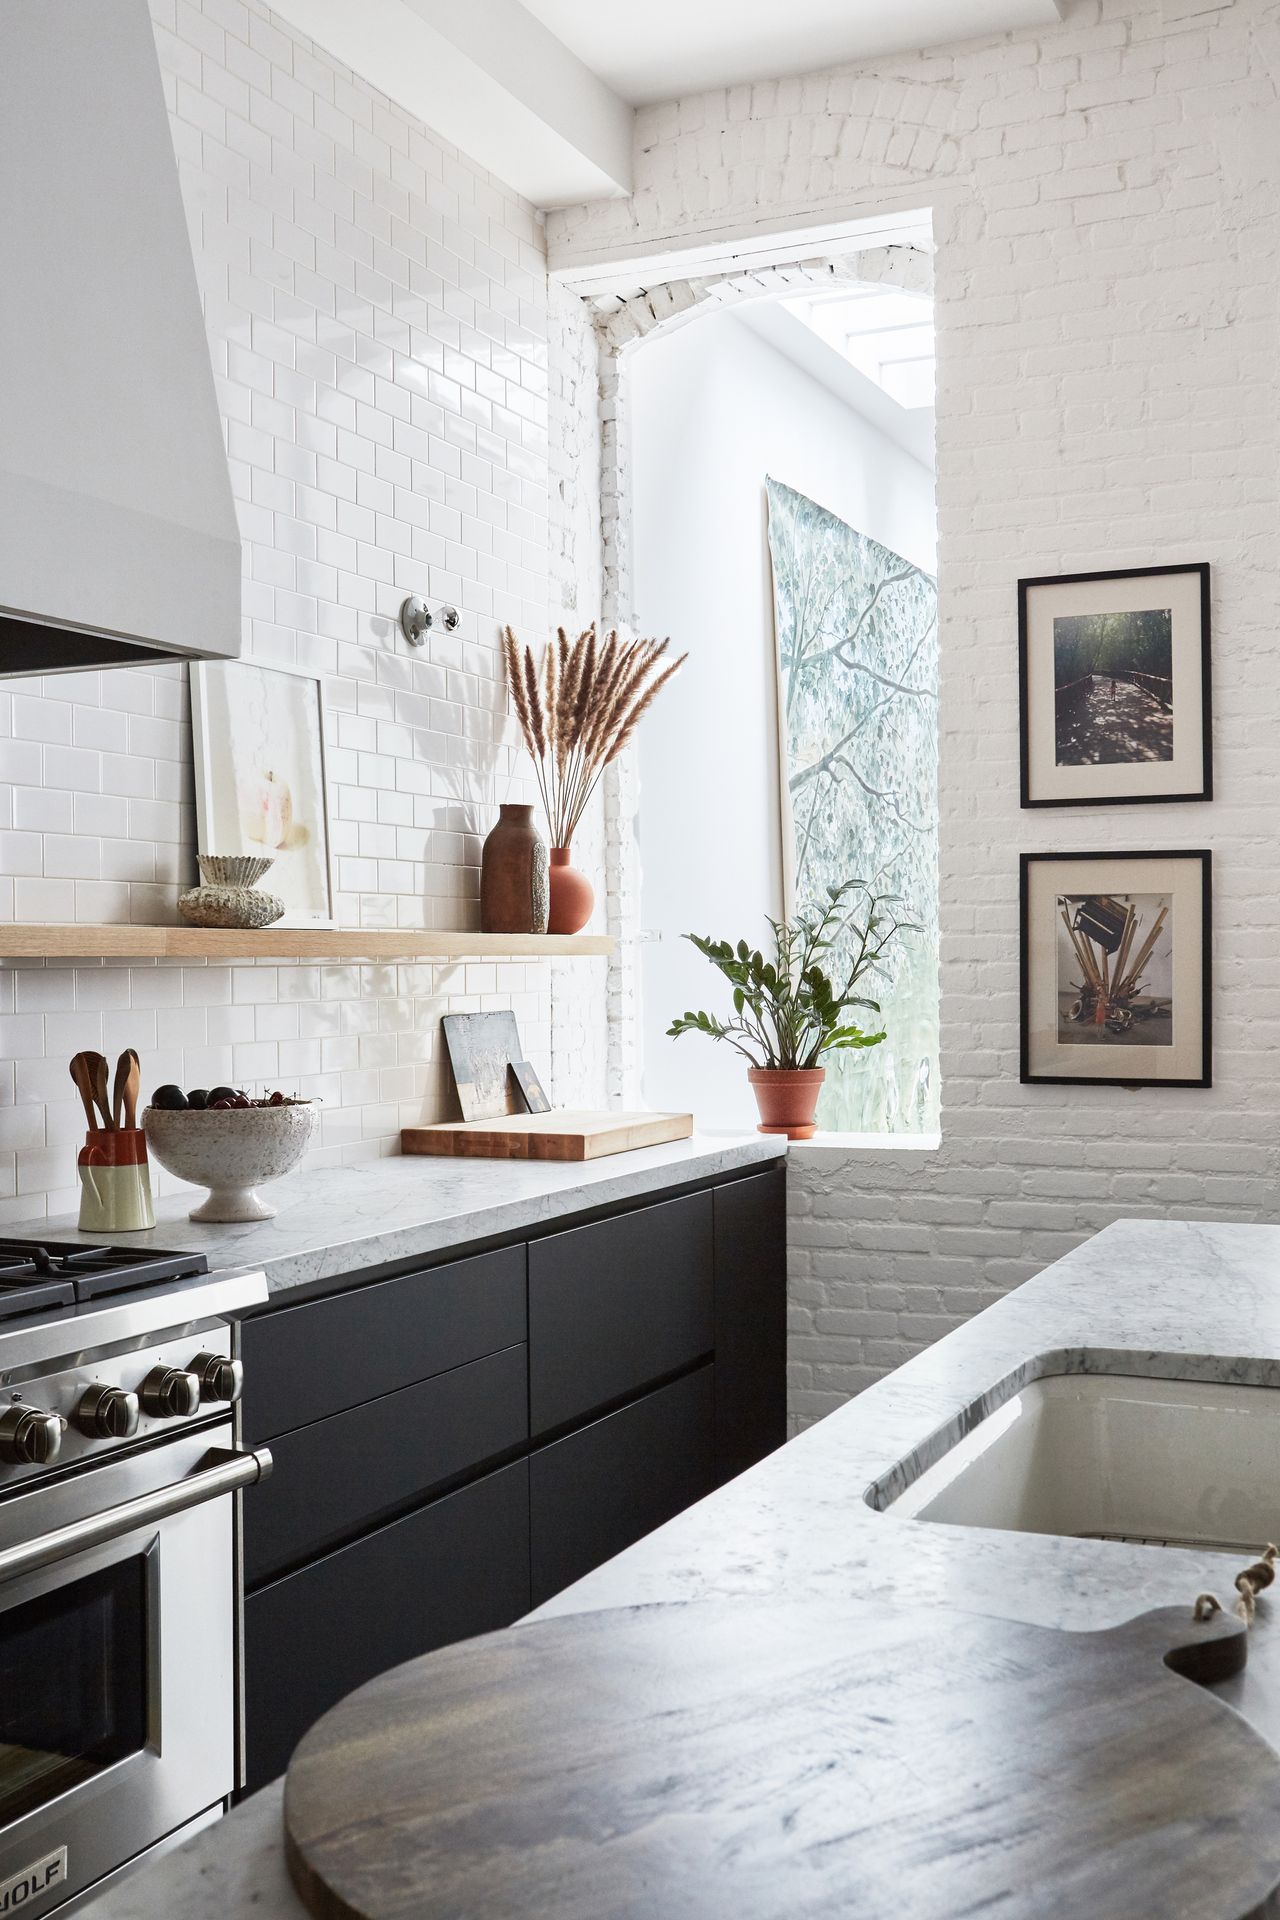 7 kitchen renovation tips to increase your home's value | Livingetc